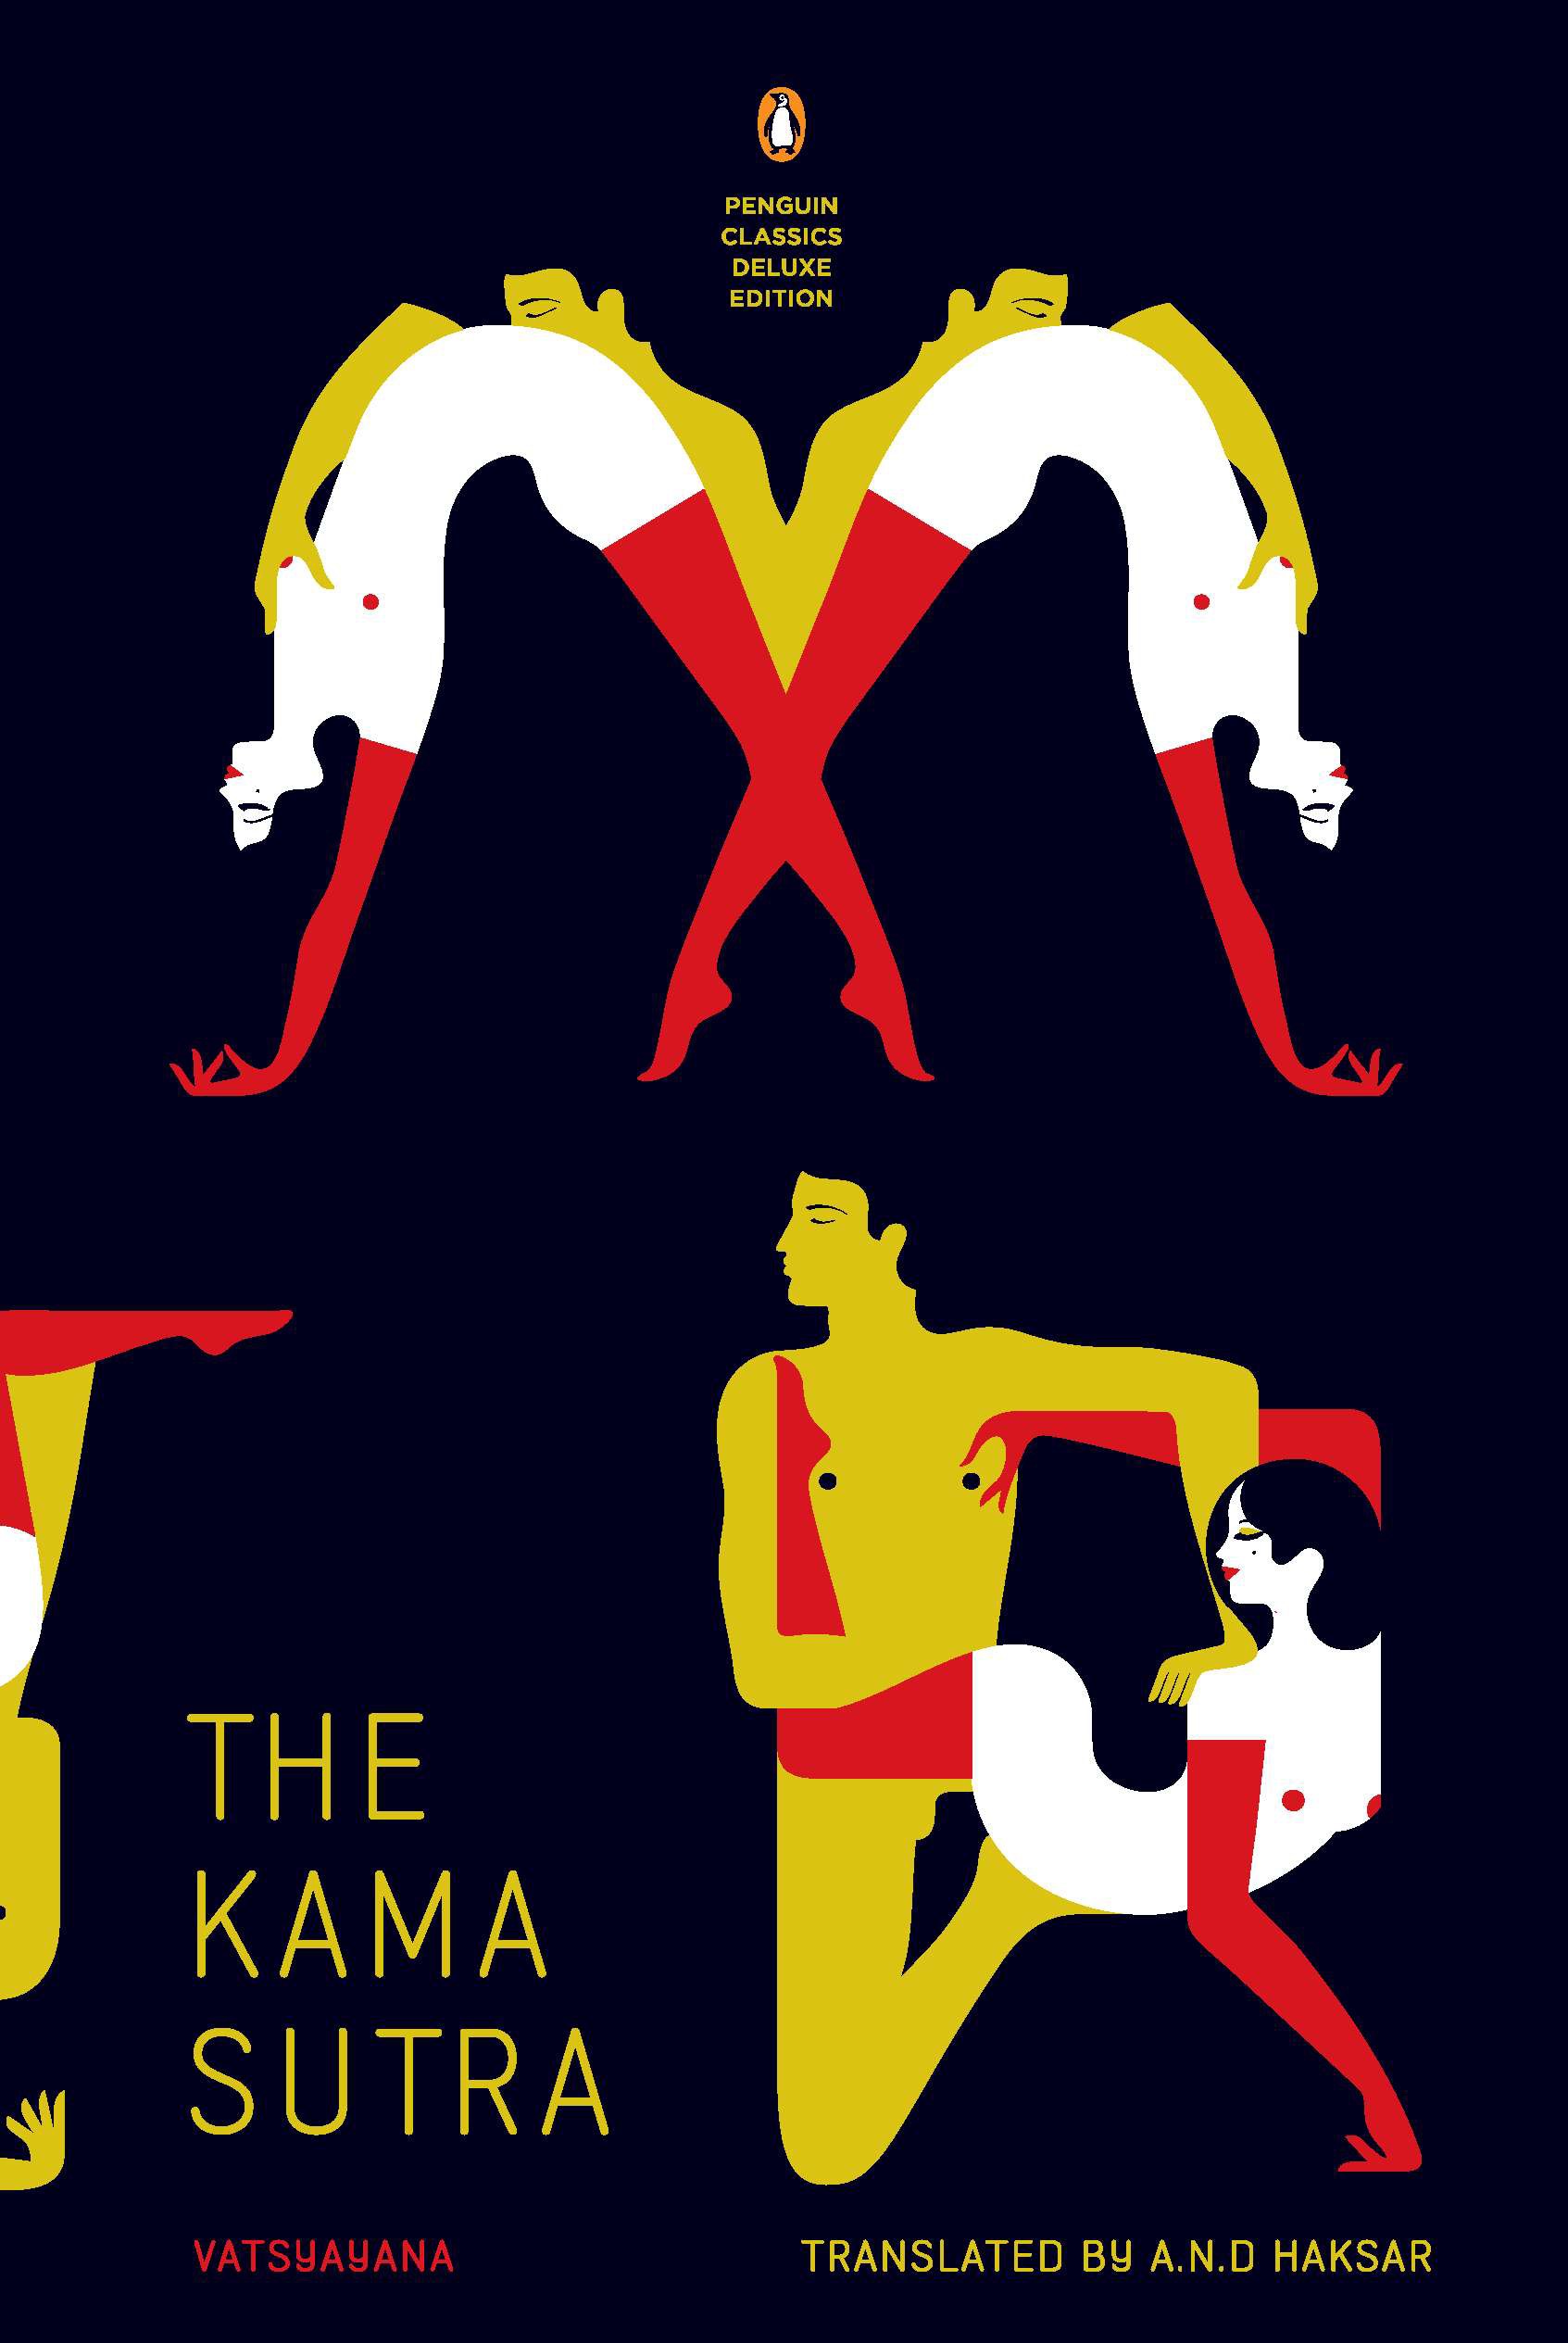 Kama Sutra (PENGUIN CLASSICS DELUXE EDITION) By VATSYAYANA Illustrated by MALIKA FAVRE Translated by A. N. D. Haksar